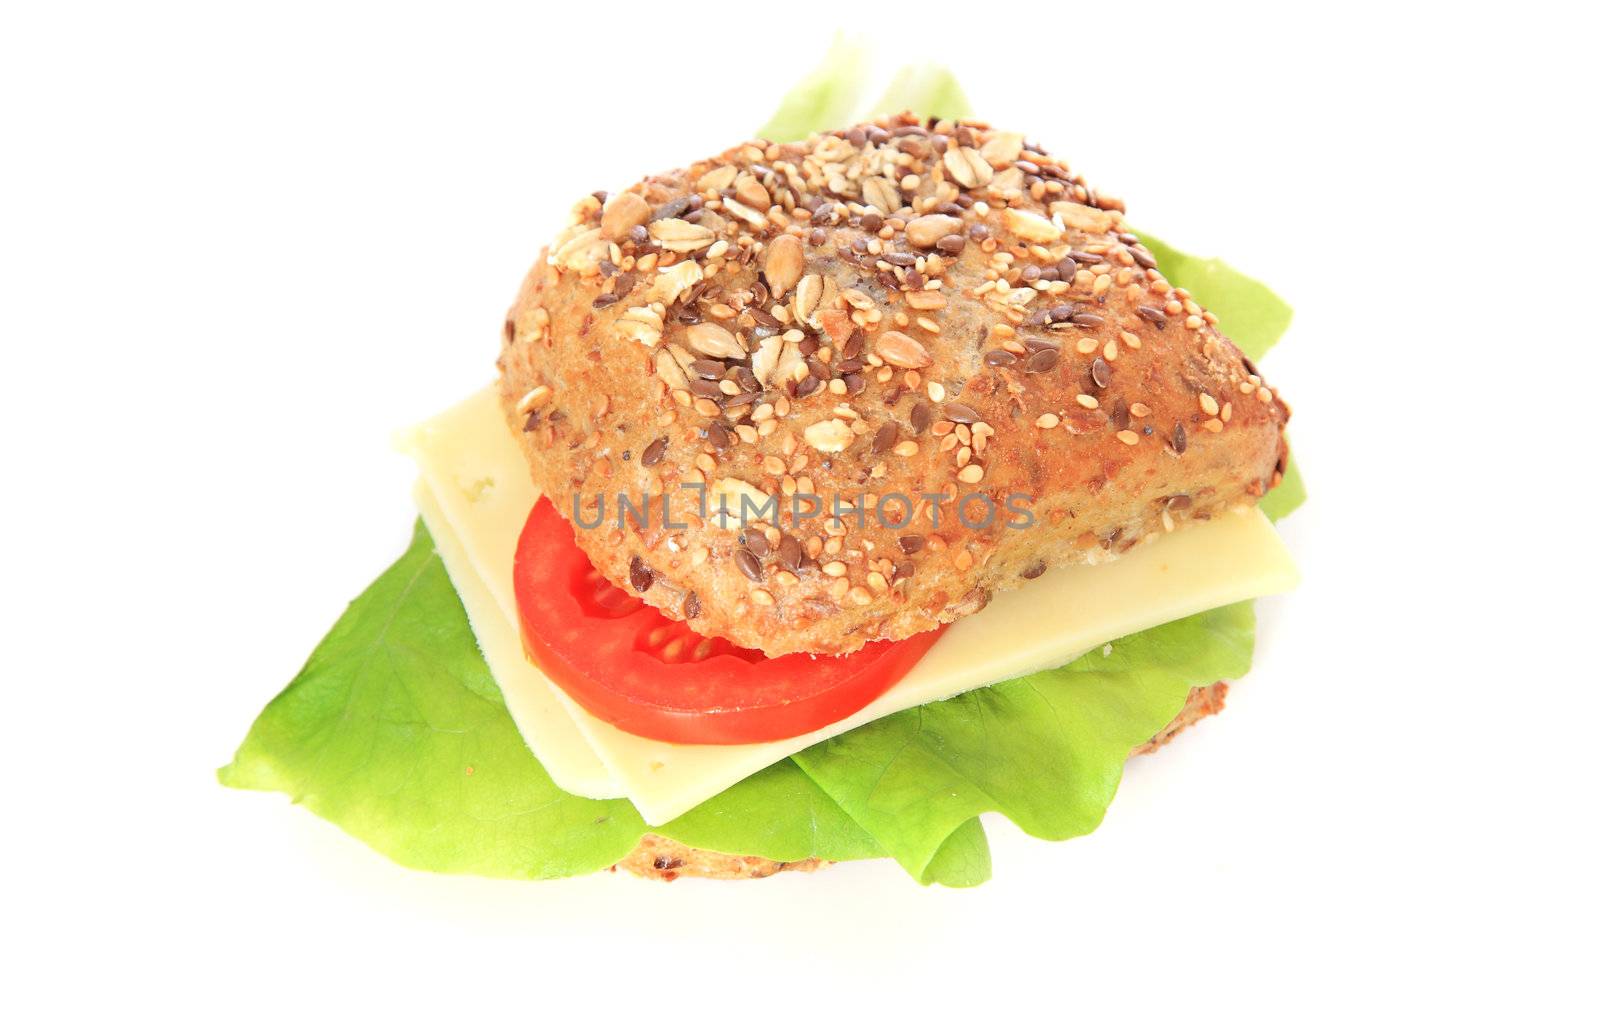 Multi-grain roll with cheese and lettuce. All on white background.